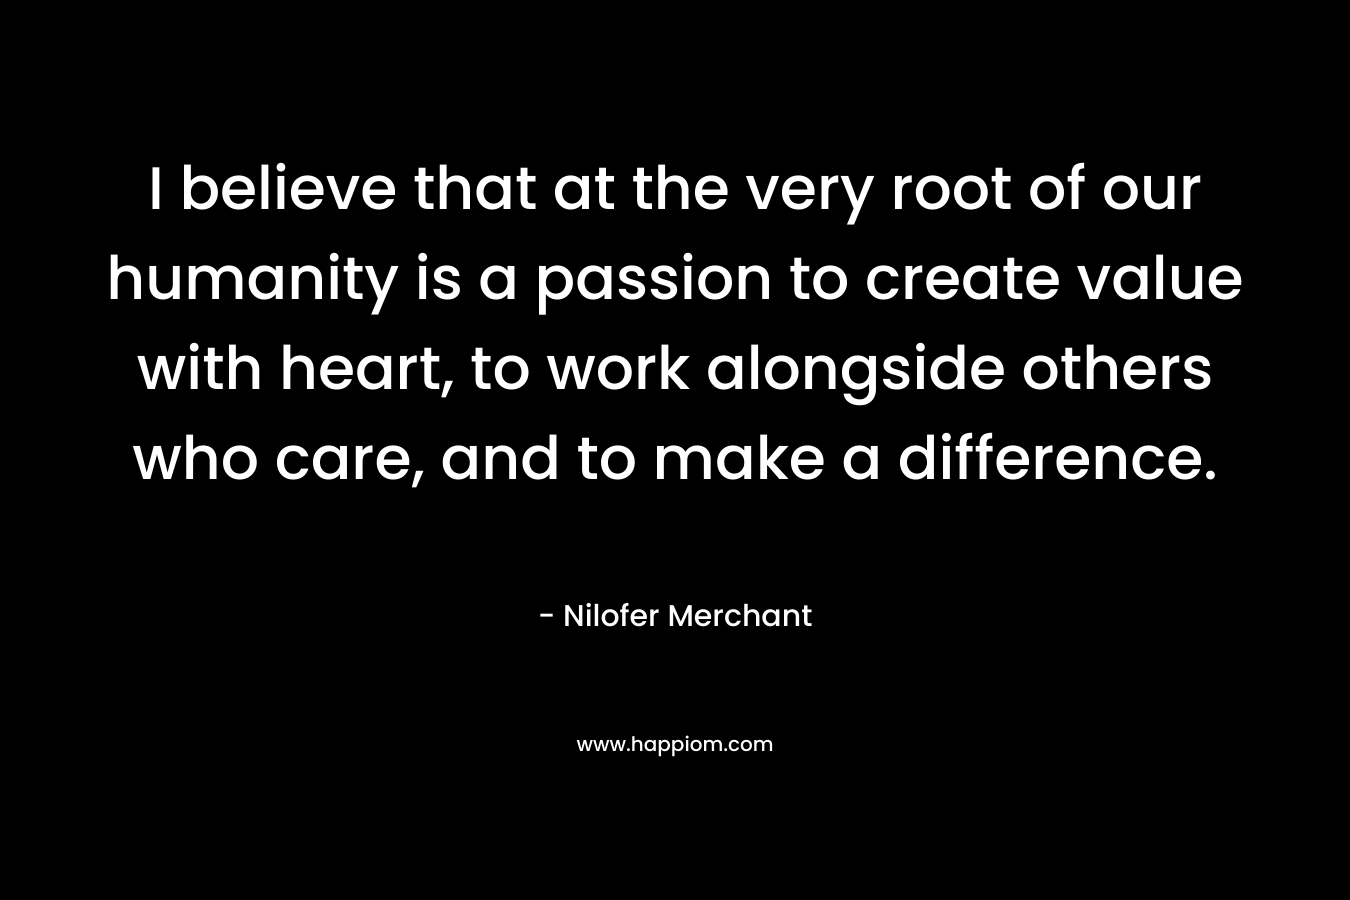 I believe that at the very root of our humanity is a passion to create value with heart, to work alongside others who care, and to make a difference.